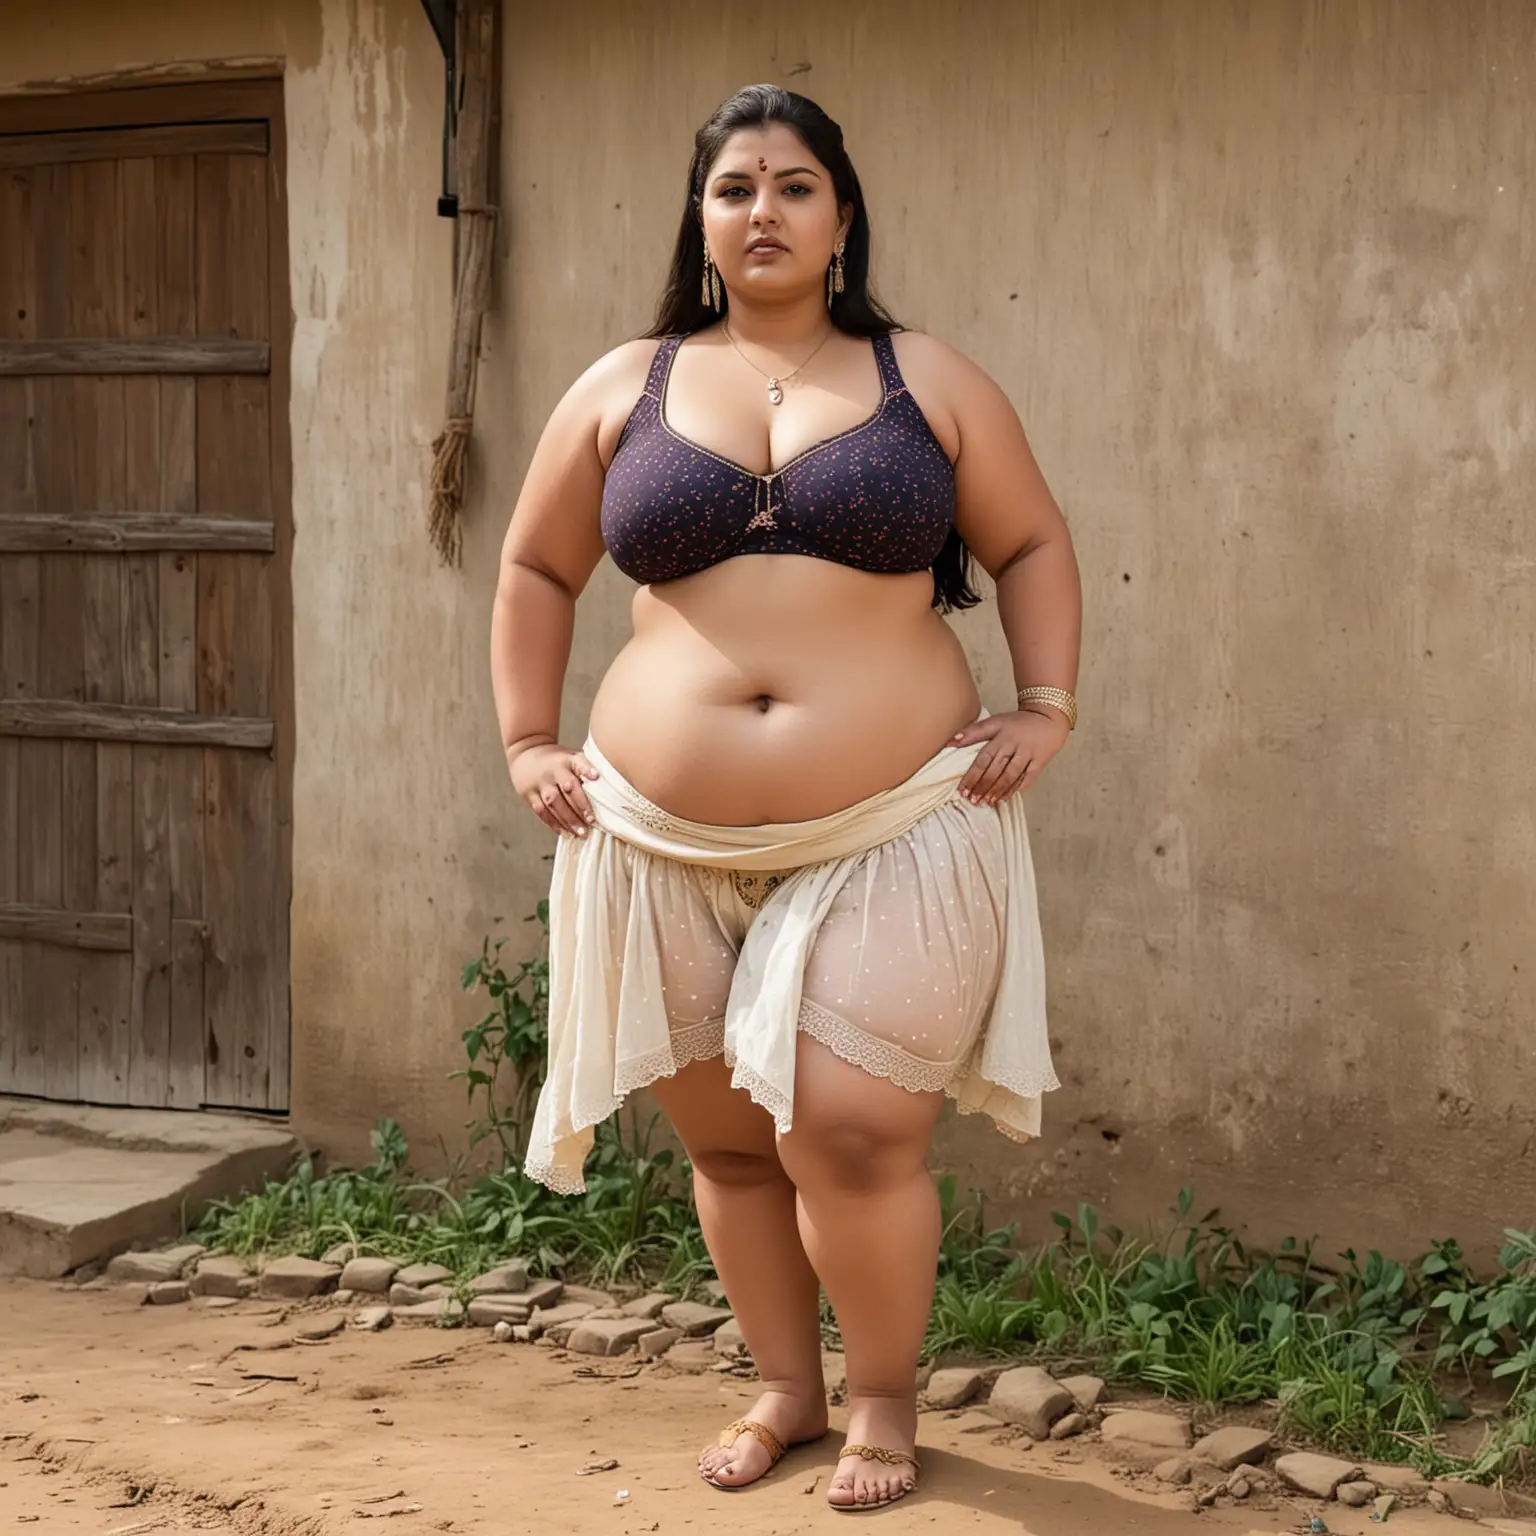  A Sexy BBW woman, wearing an old Indian undergarment, a chubby fatty waist, in a village 